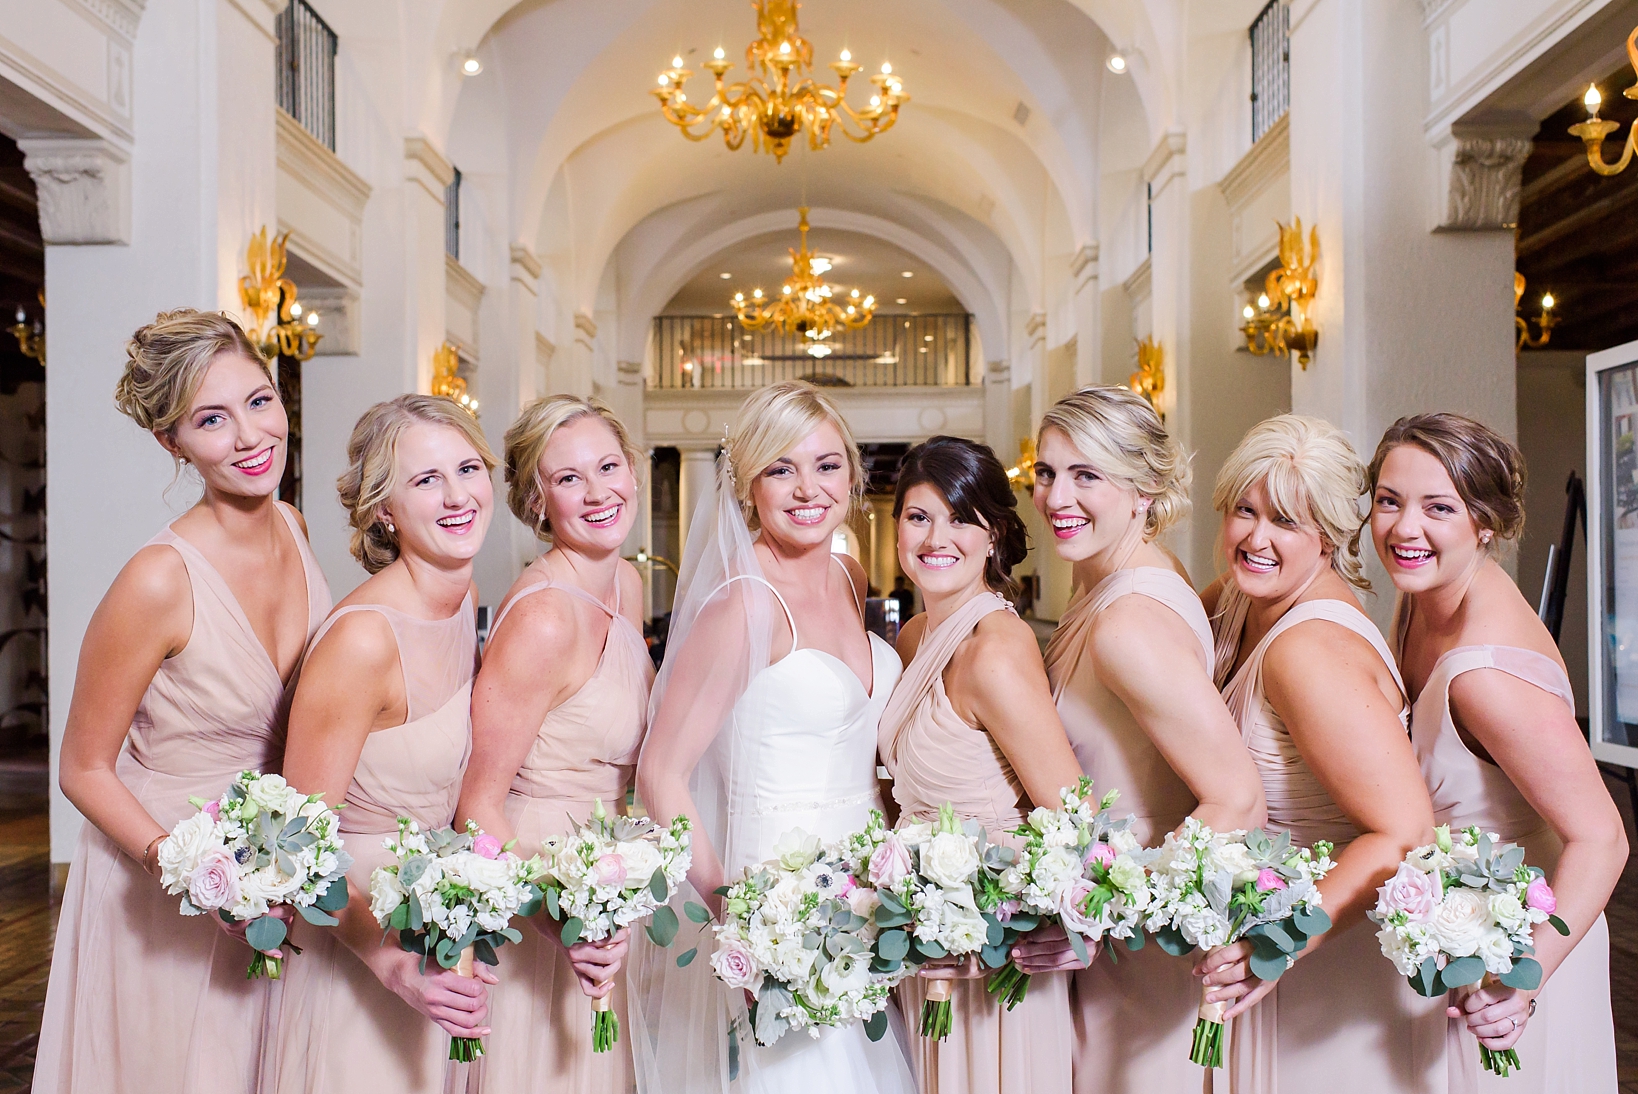 The Bridesmaids in the lobby of the Vinoy Hotel in St. Petersburg, FL